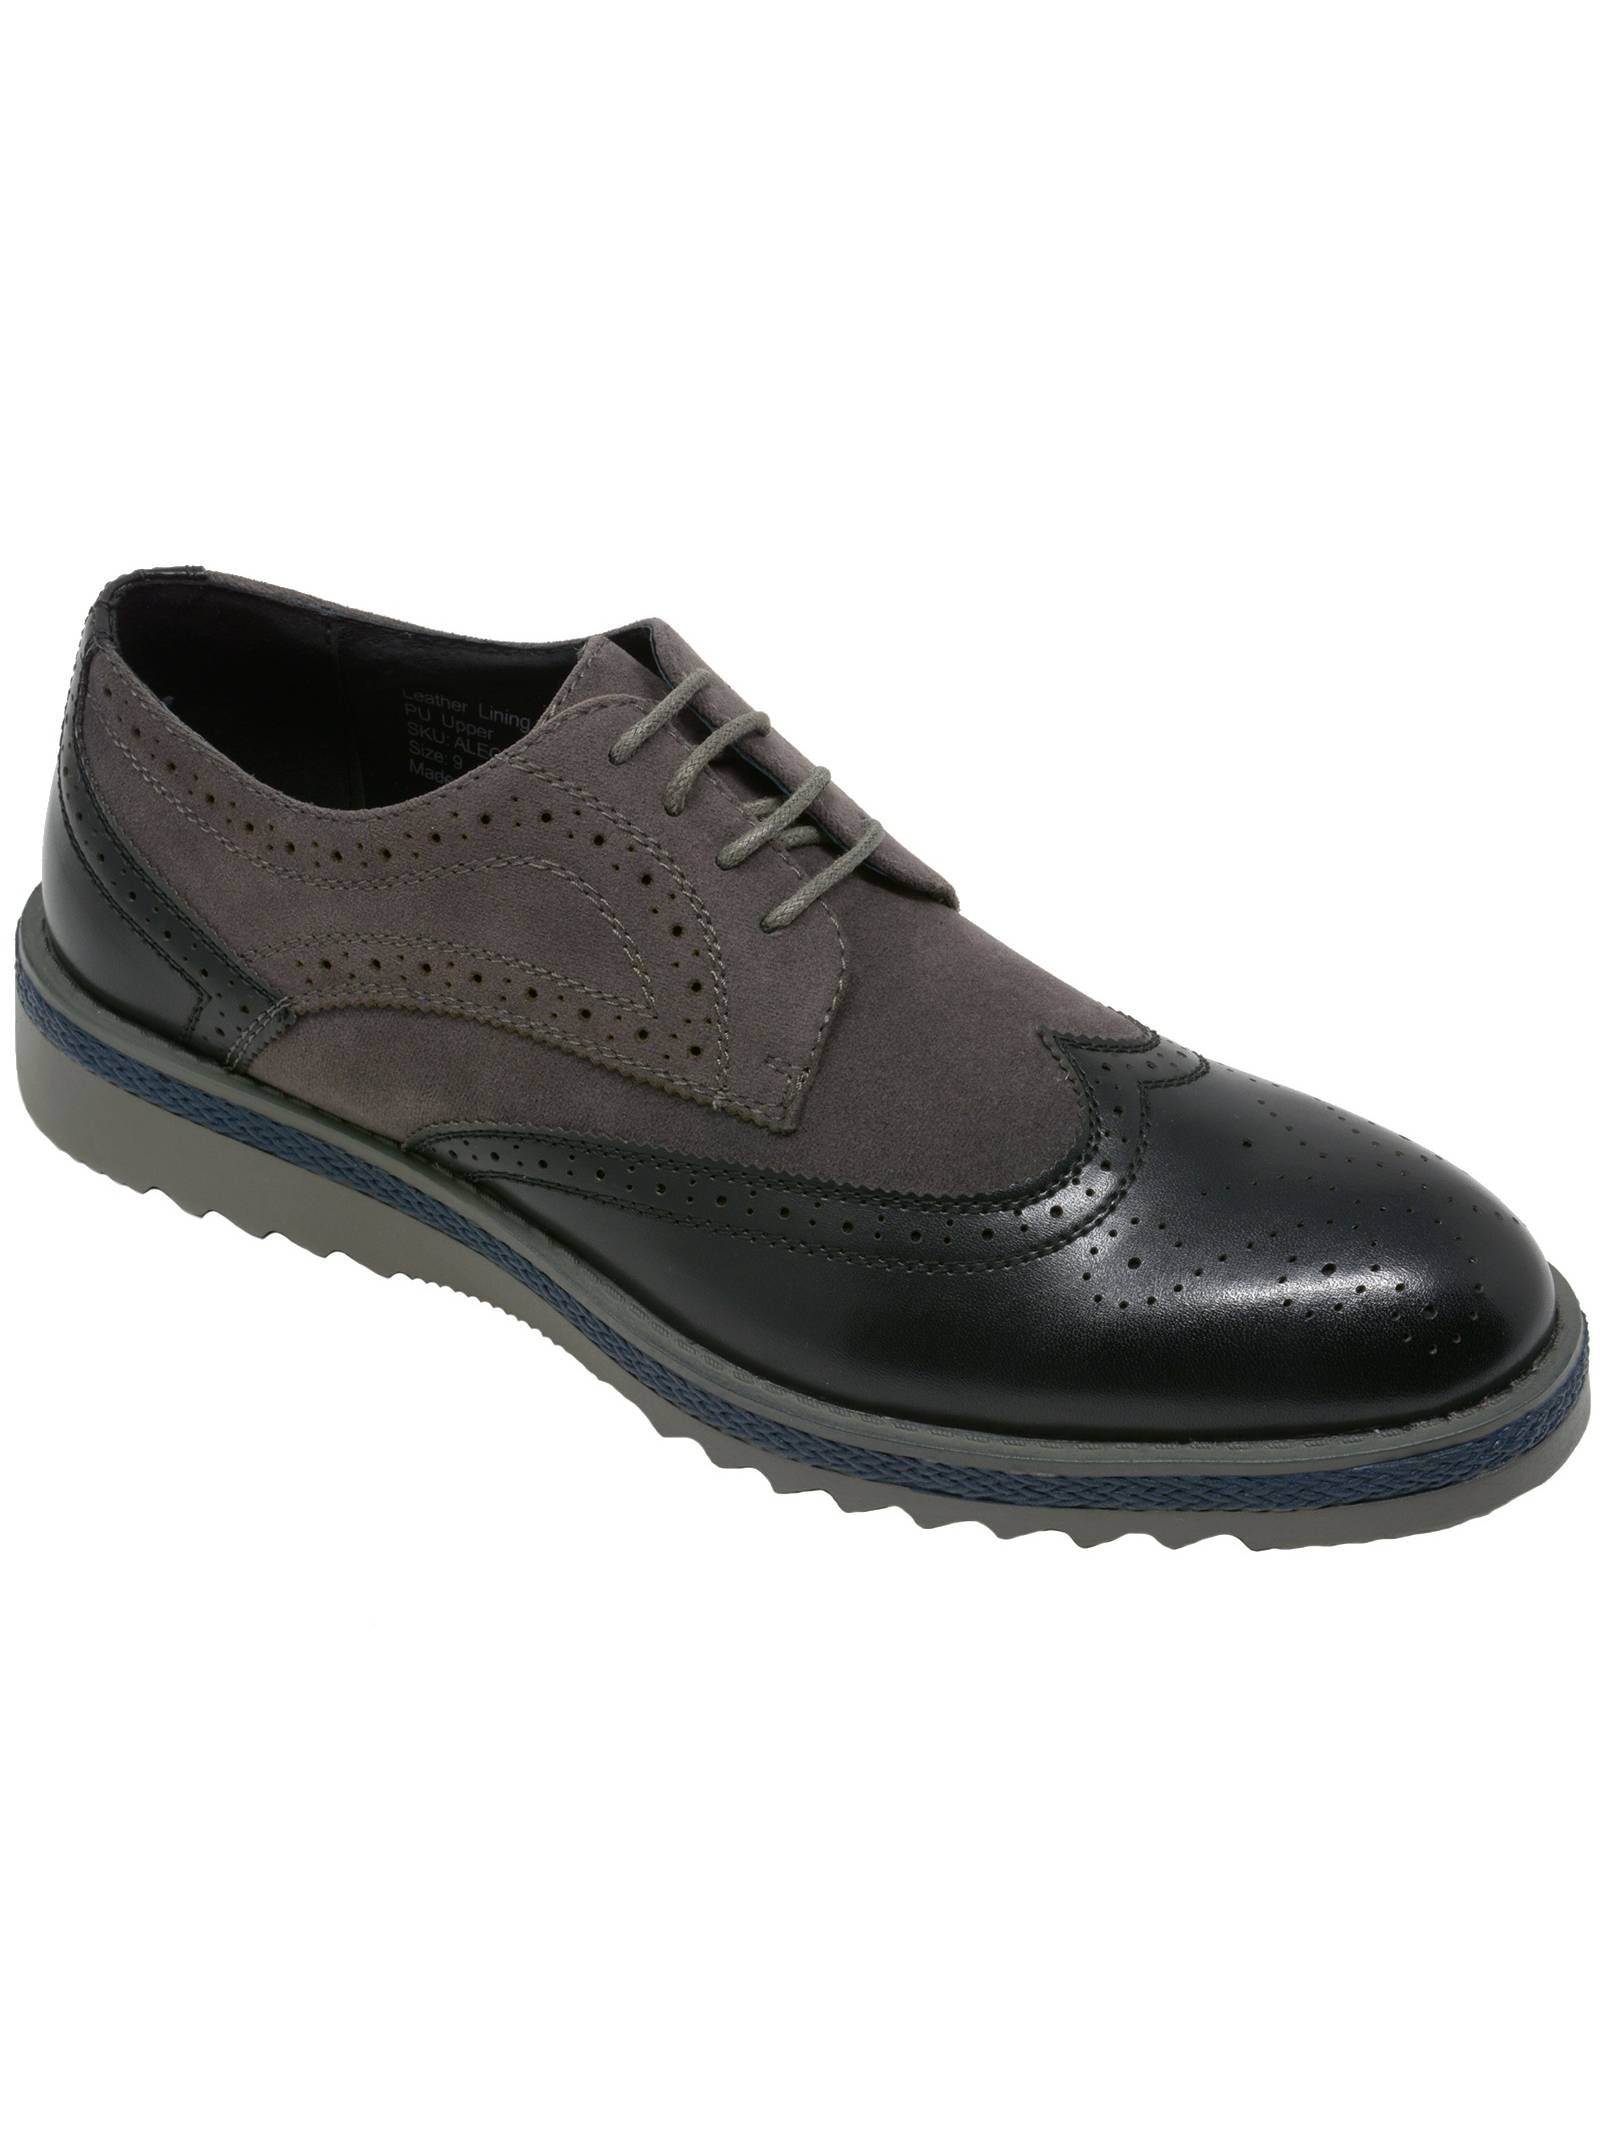 Alpine Swiss Alec Mens Wingtip Shoes 1.5” Ripple Sole Leather Insole & Lining - image 3 of 7